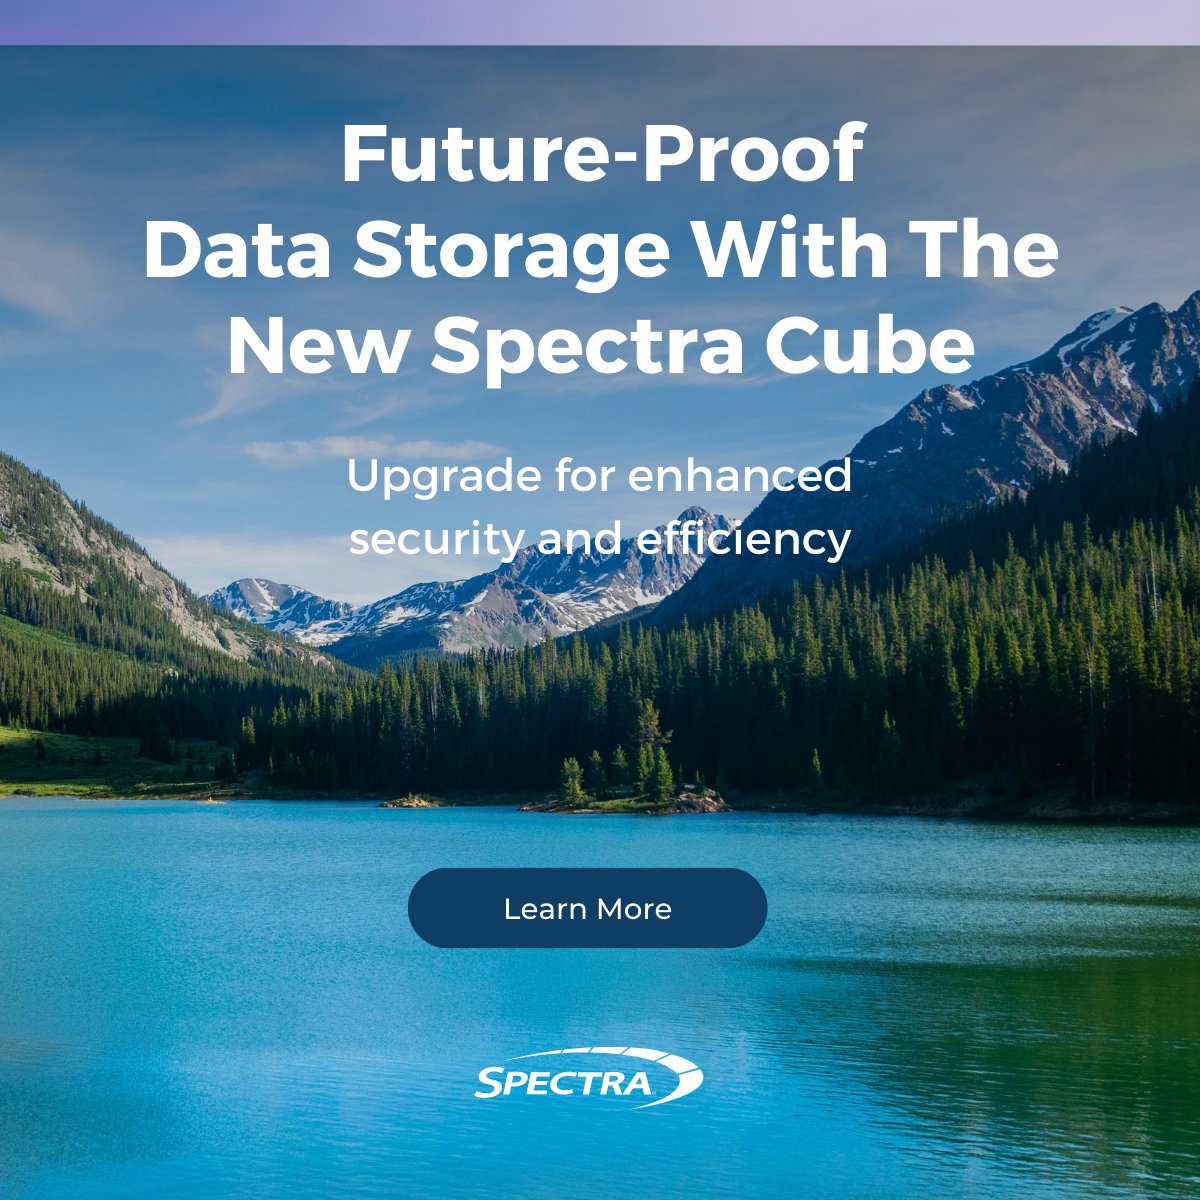 Future-proof long-term data storage with Spectra Cube! Effortlessly scale, fortify against cyber threats, and simplify management with LumOS UI. Upgrade now for enhanced security and efficiency! #TapeStorage #DataSecurity sl.spectralogic.com/3U1CKmm